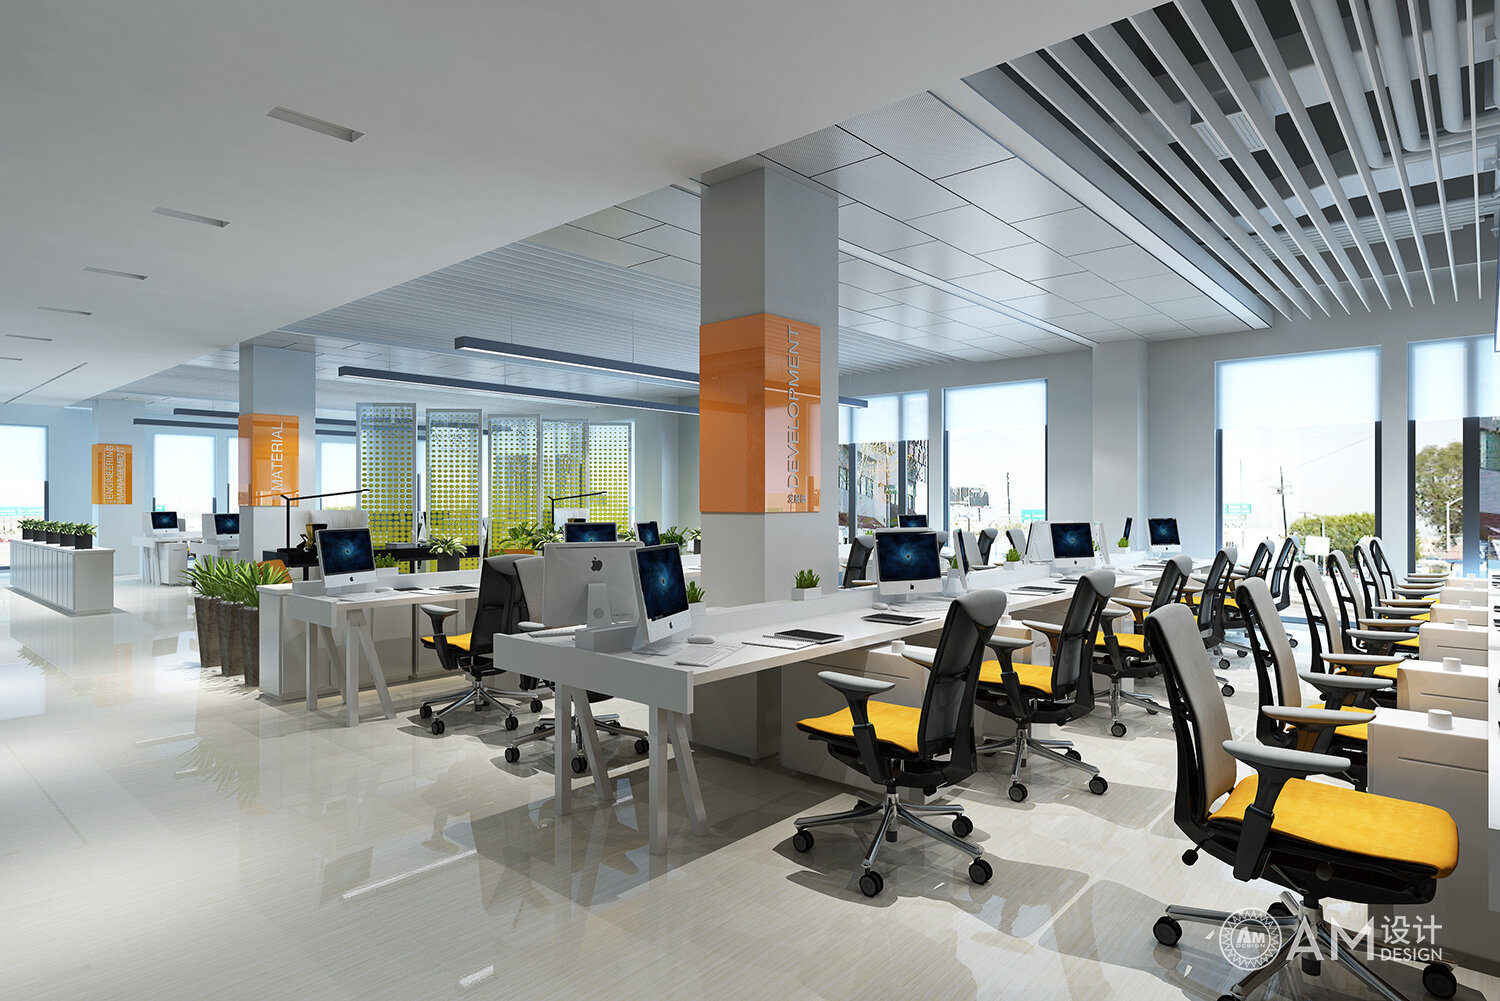 AM DESIGN | Office area design of Beijing Tongzhou New City Thermal Office Building